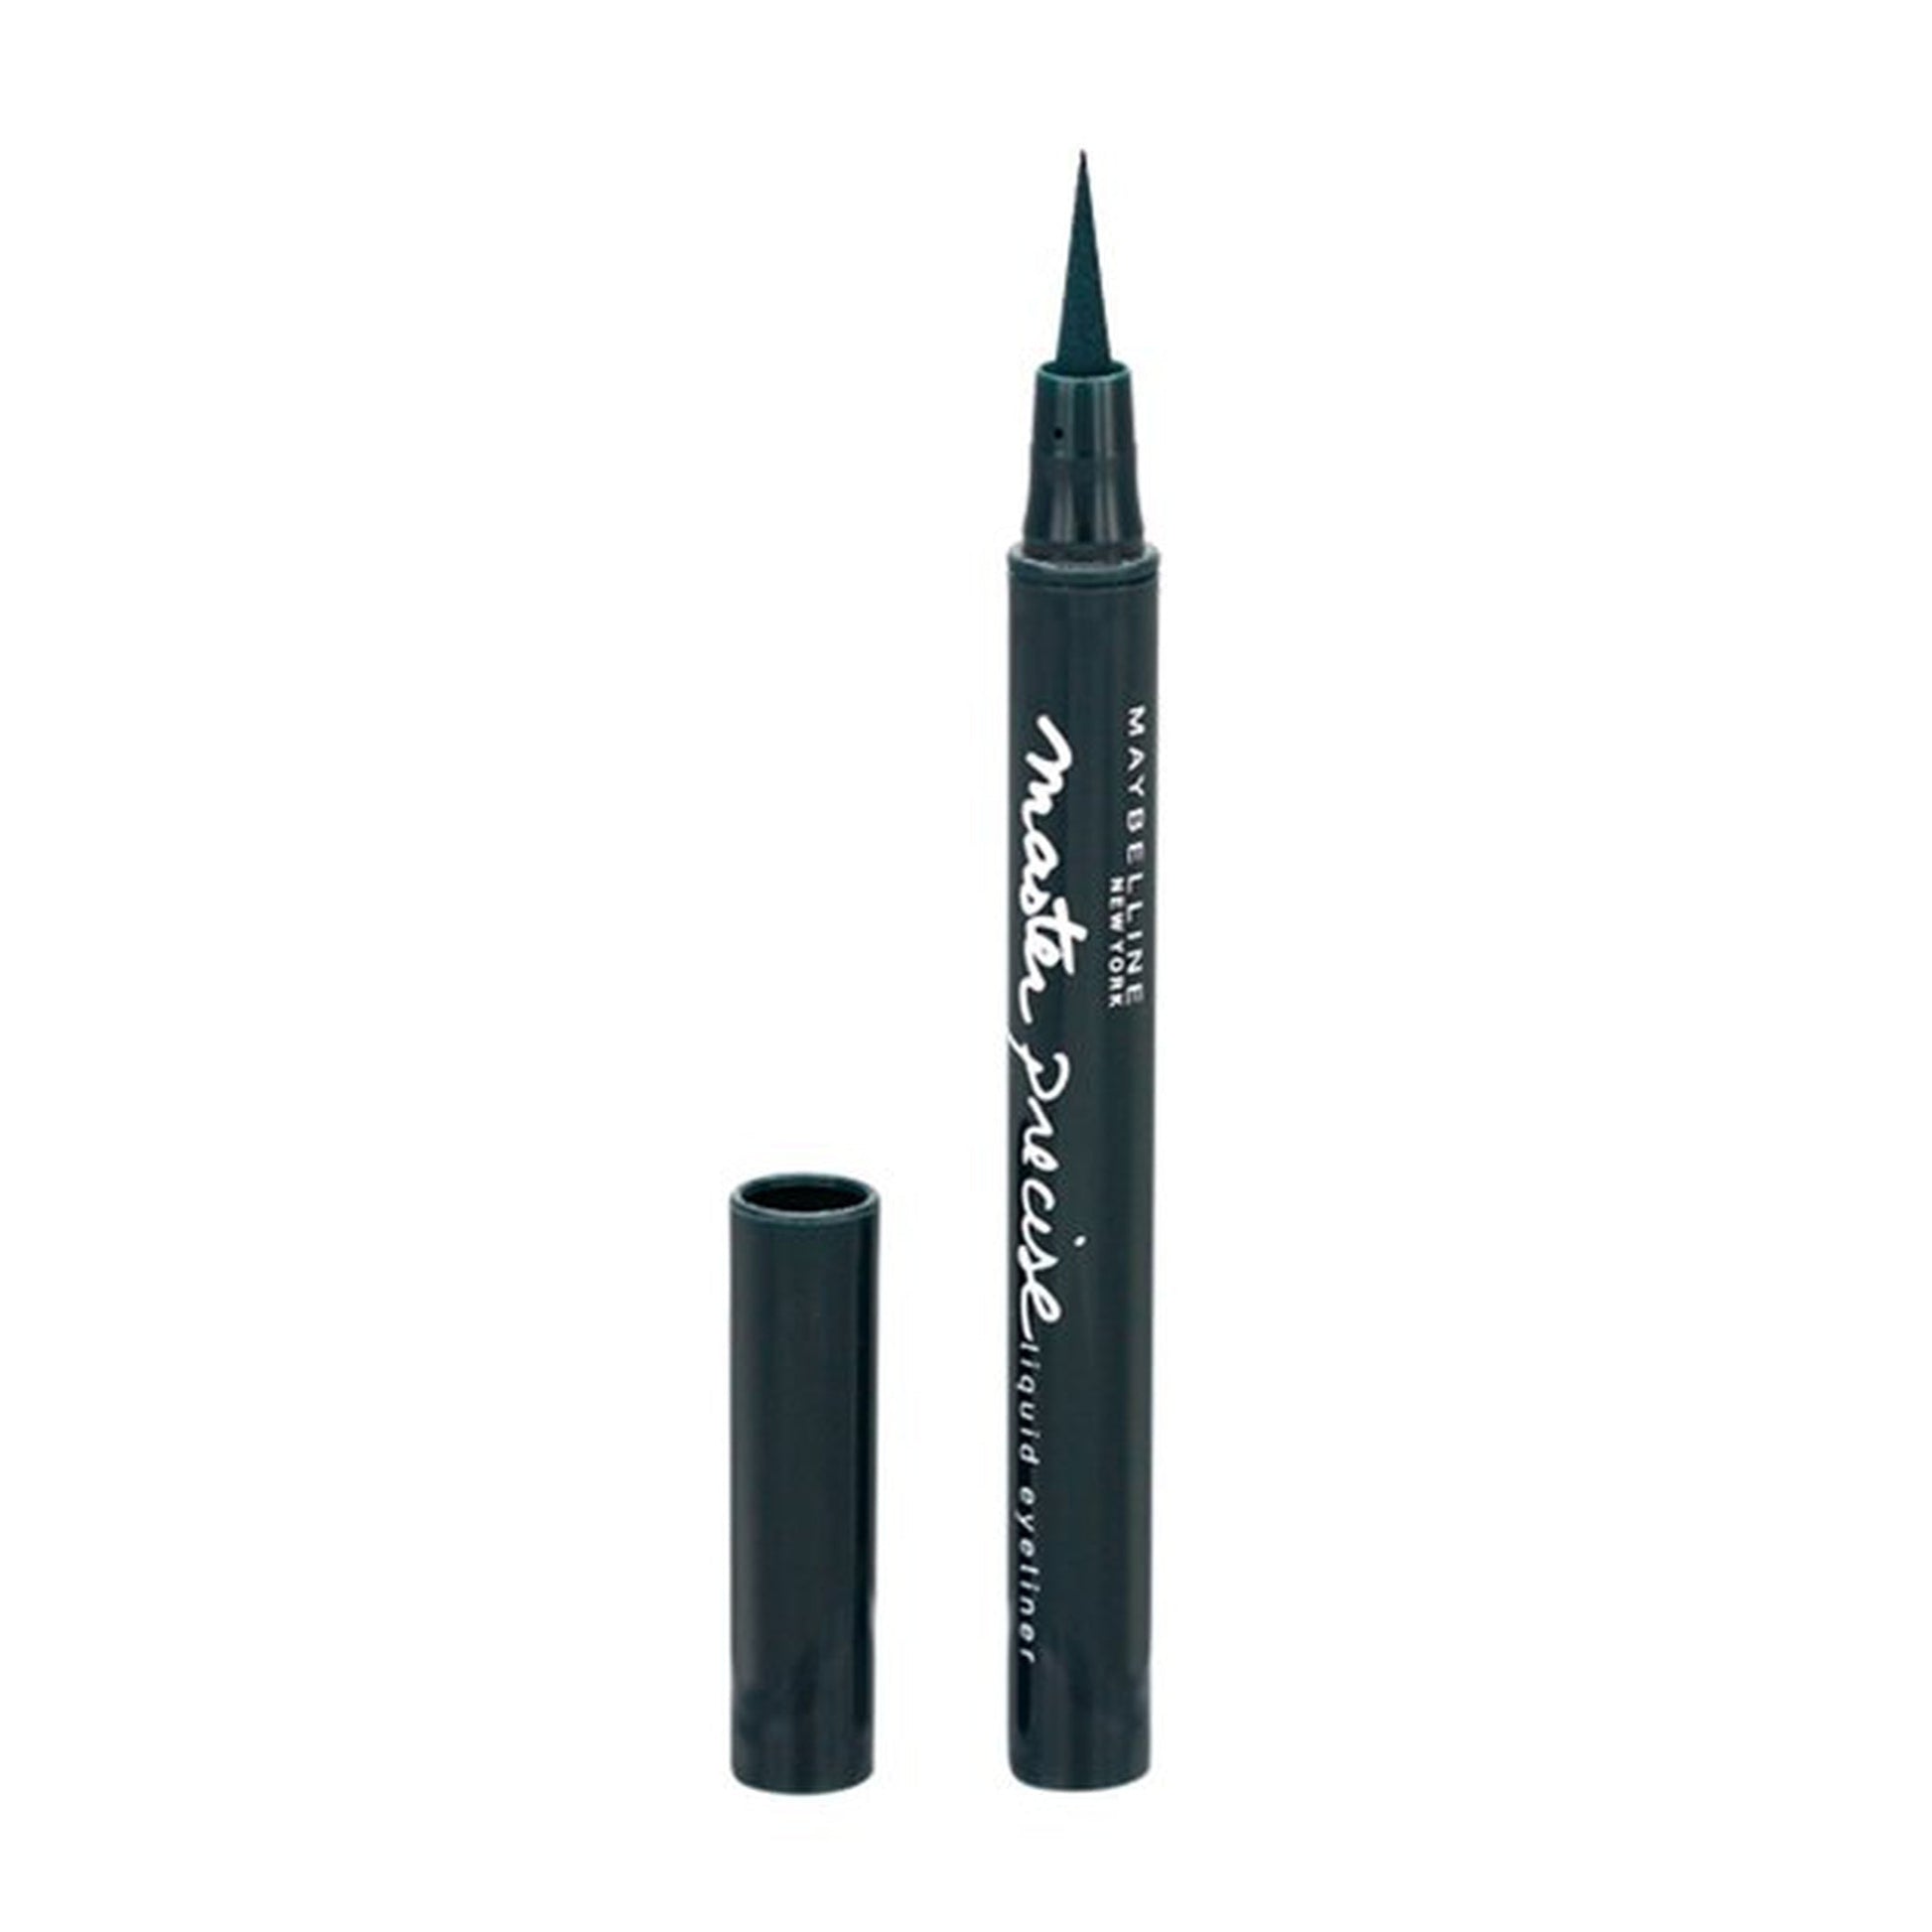 Maybelline Hyper Precise All Day Liquid Eyeliner -Jungle Green-Maybelline-BeautyNmakeup.co.uk